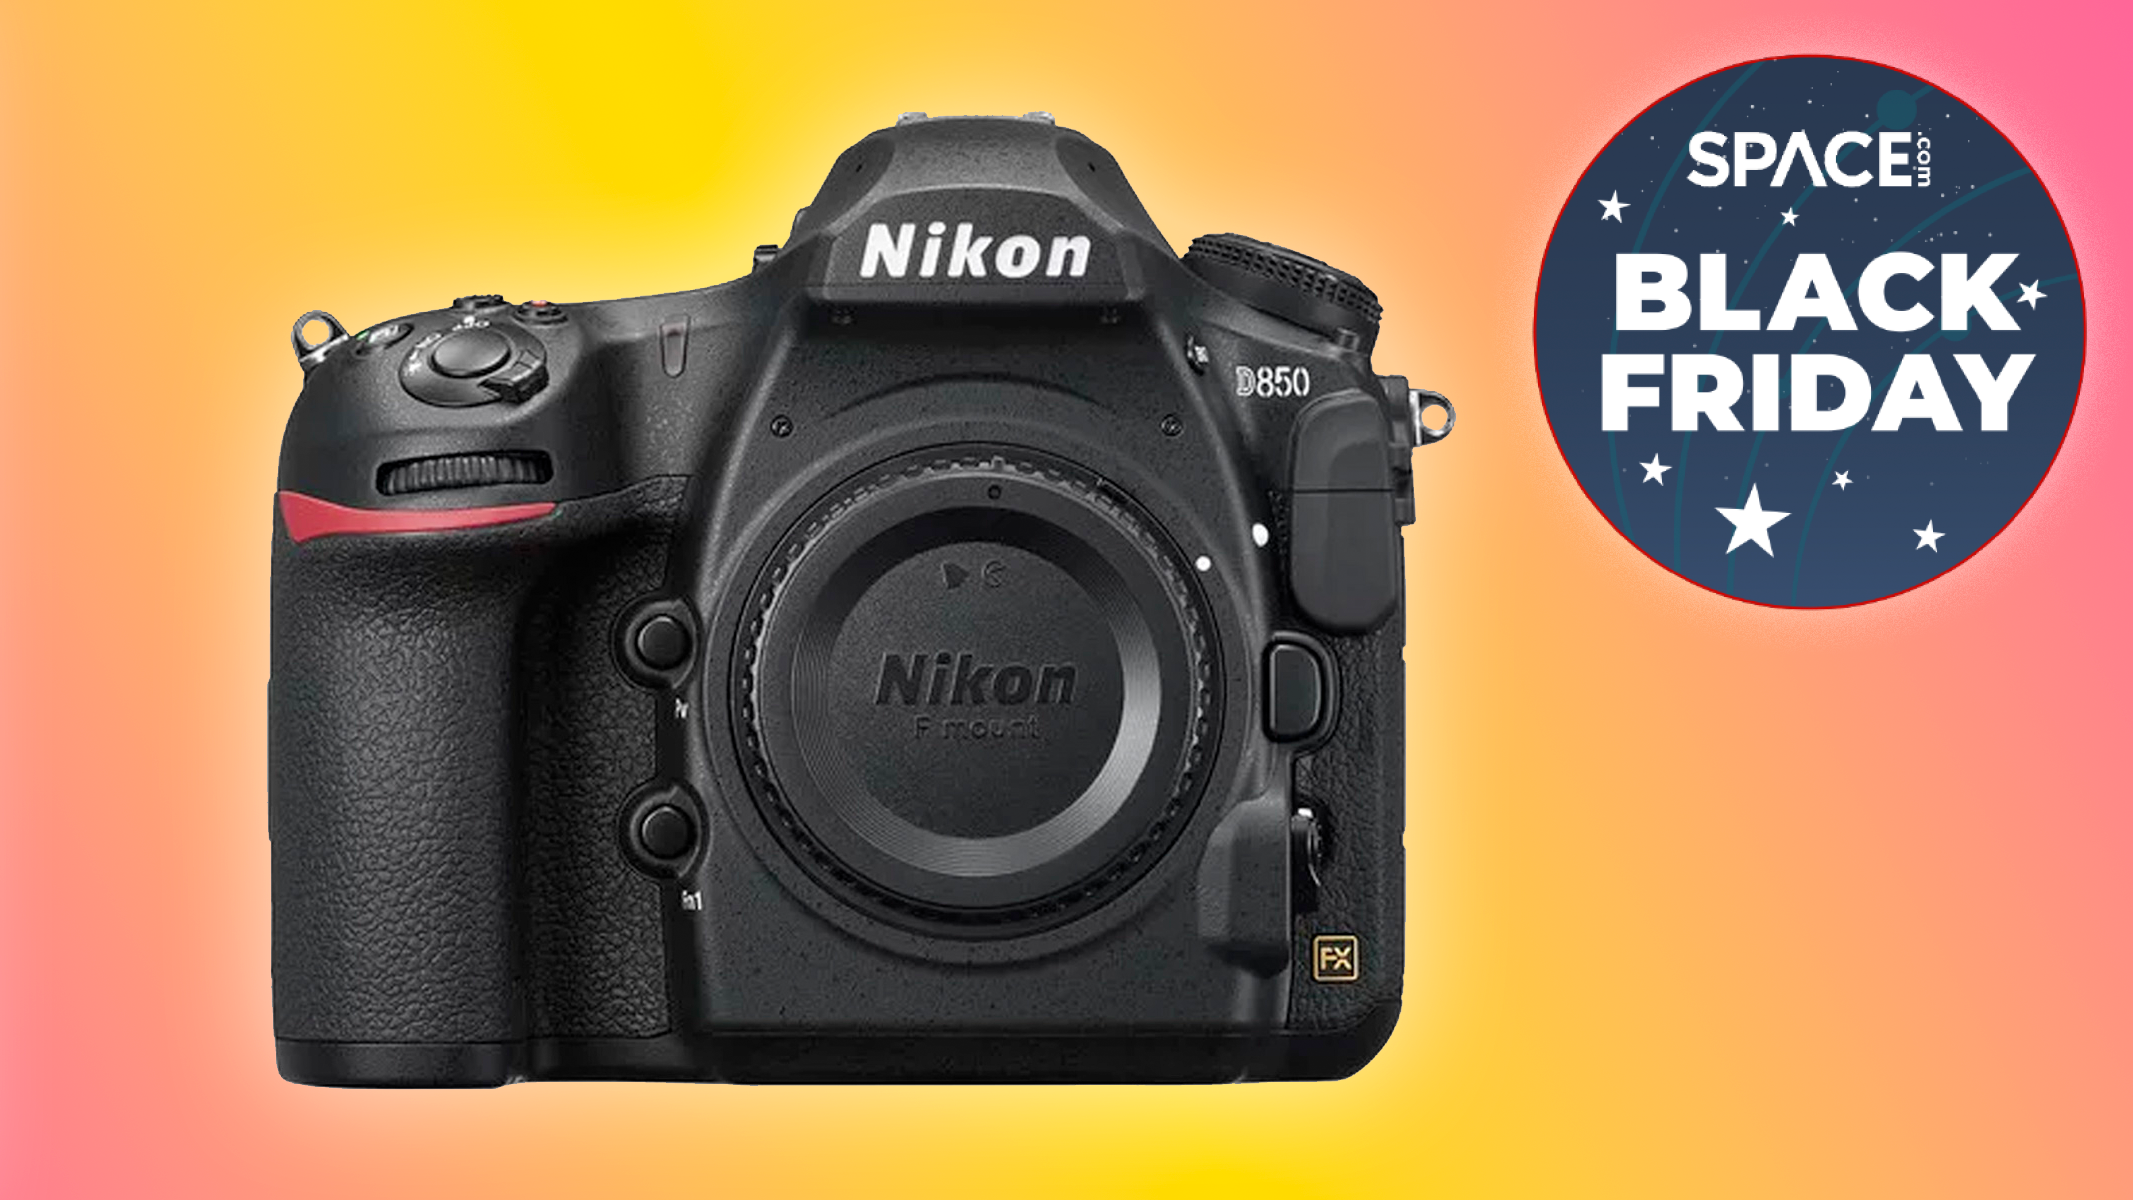 Pocket $500 on the Nikon D850 camera with this Black Friday deal Space